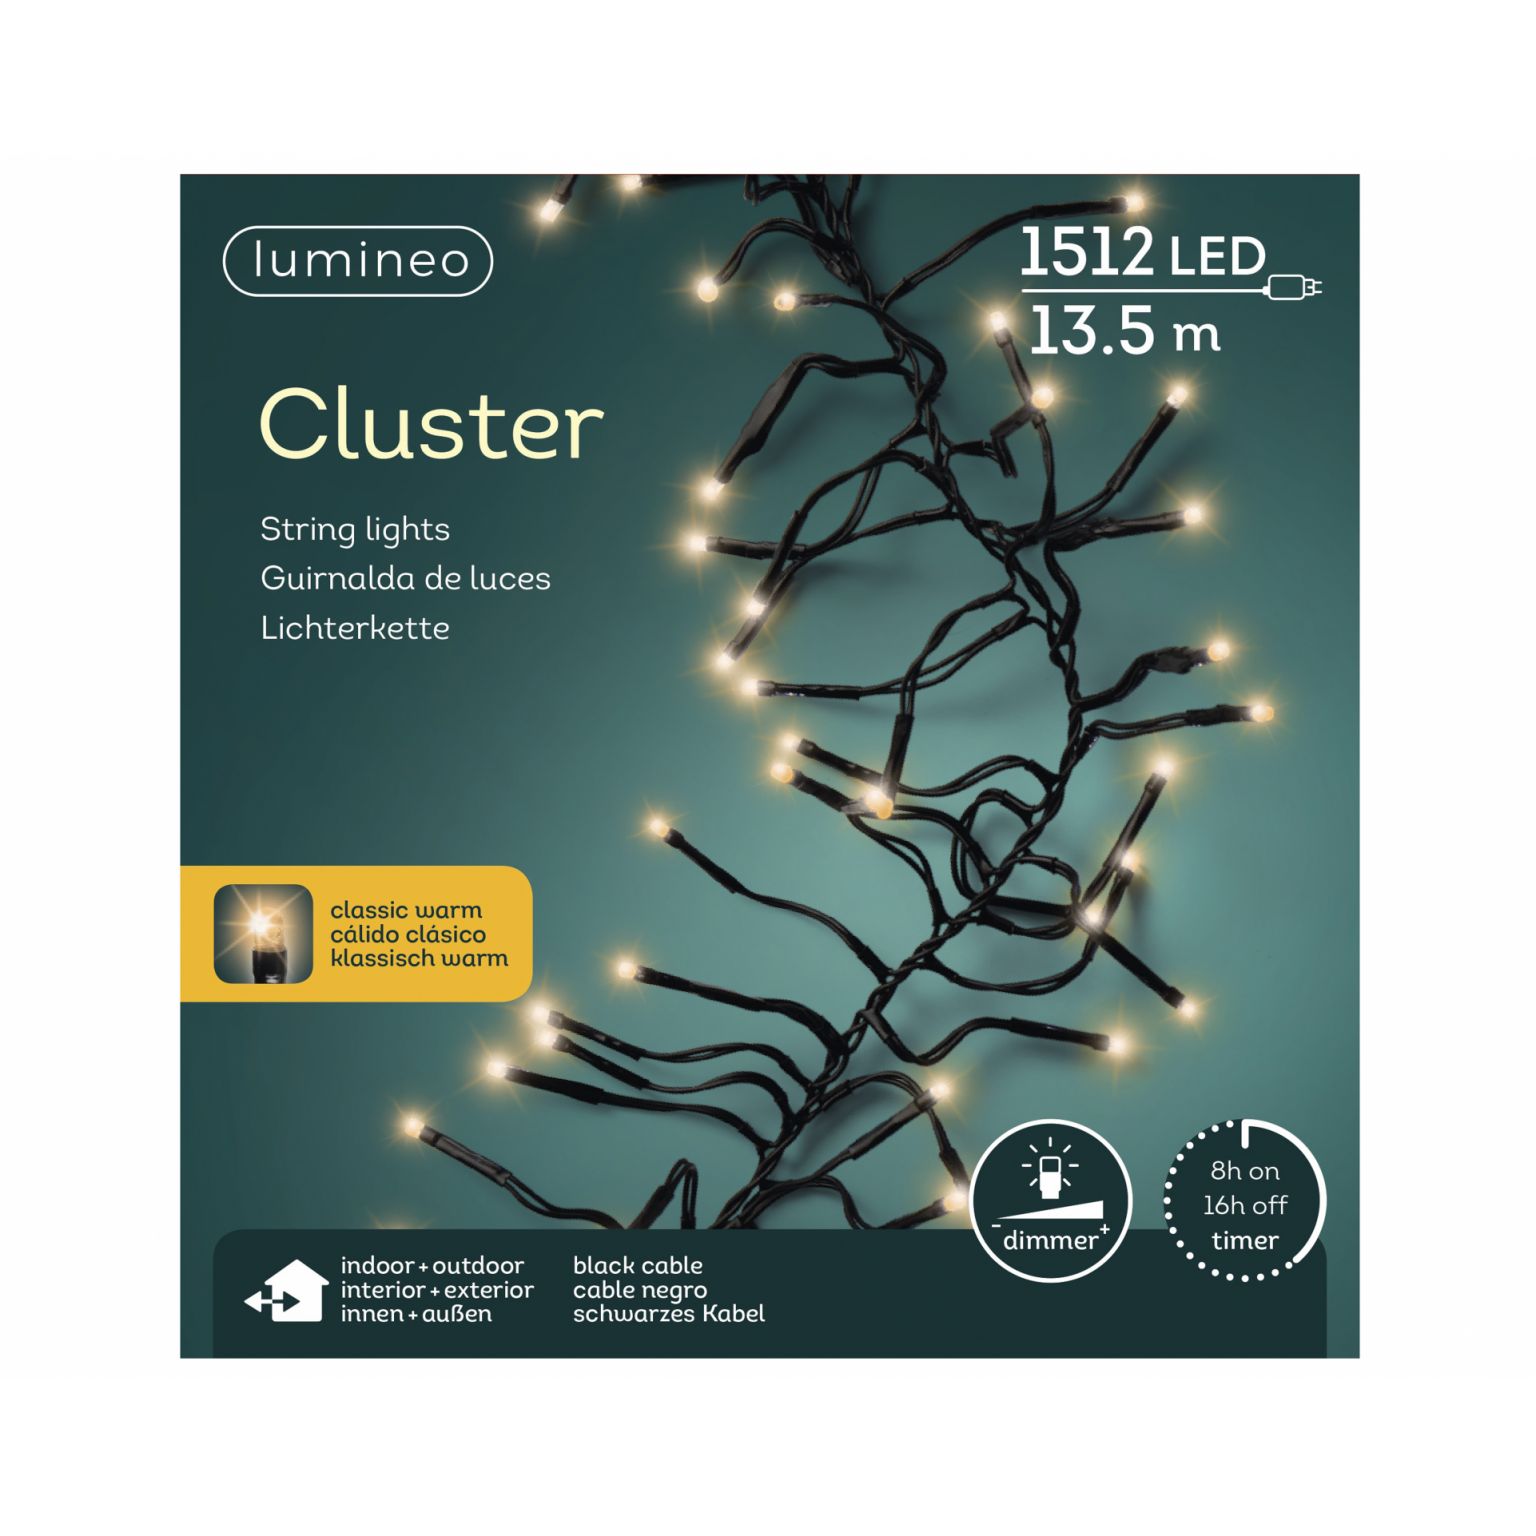 Clusterverlichting lumineo 1512-lamps LED 'classic warm